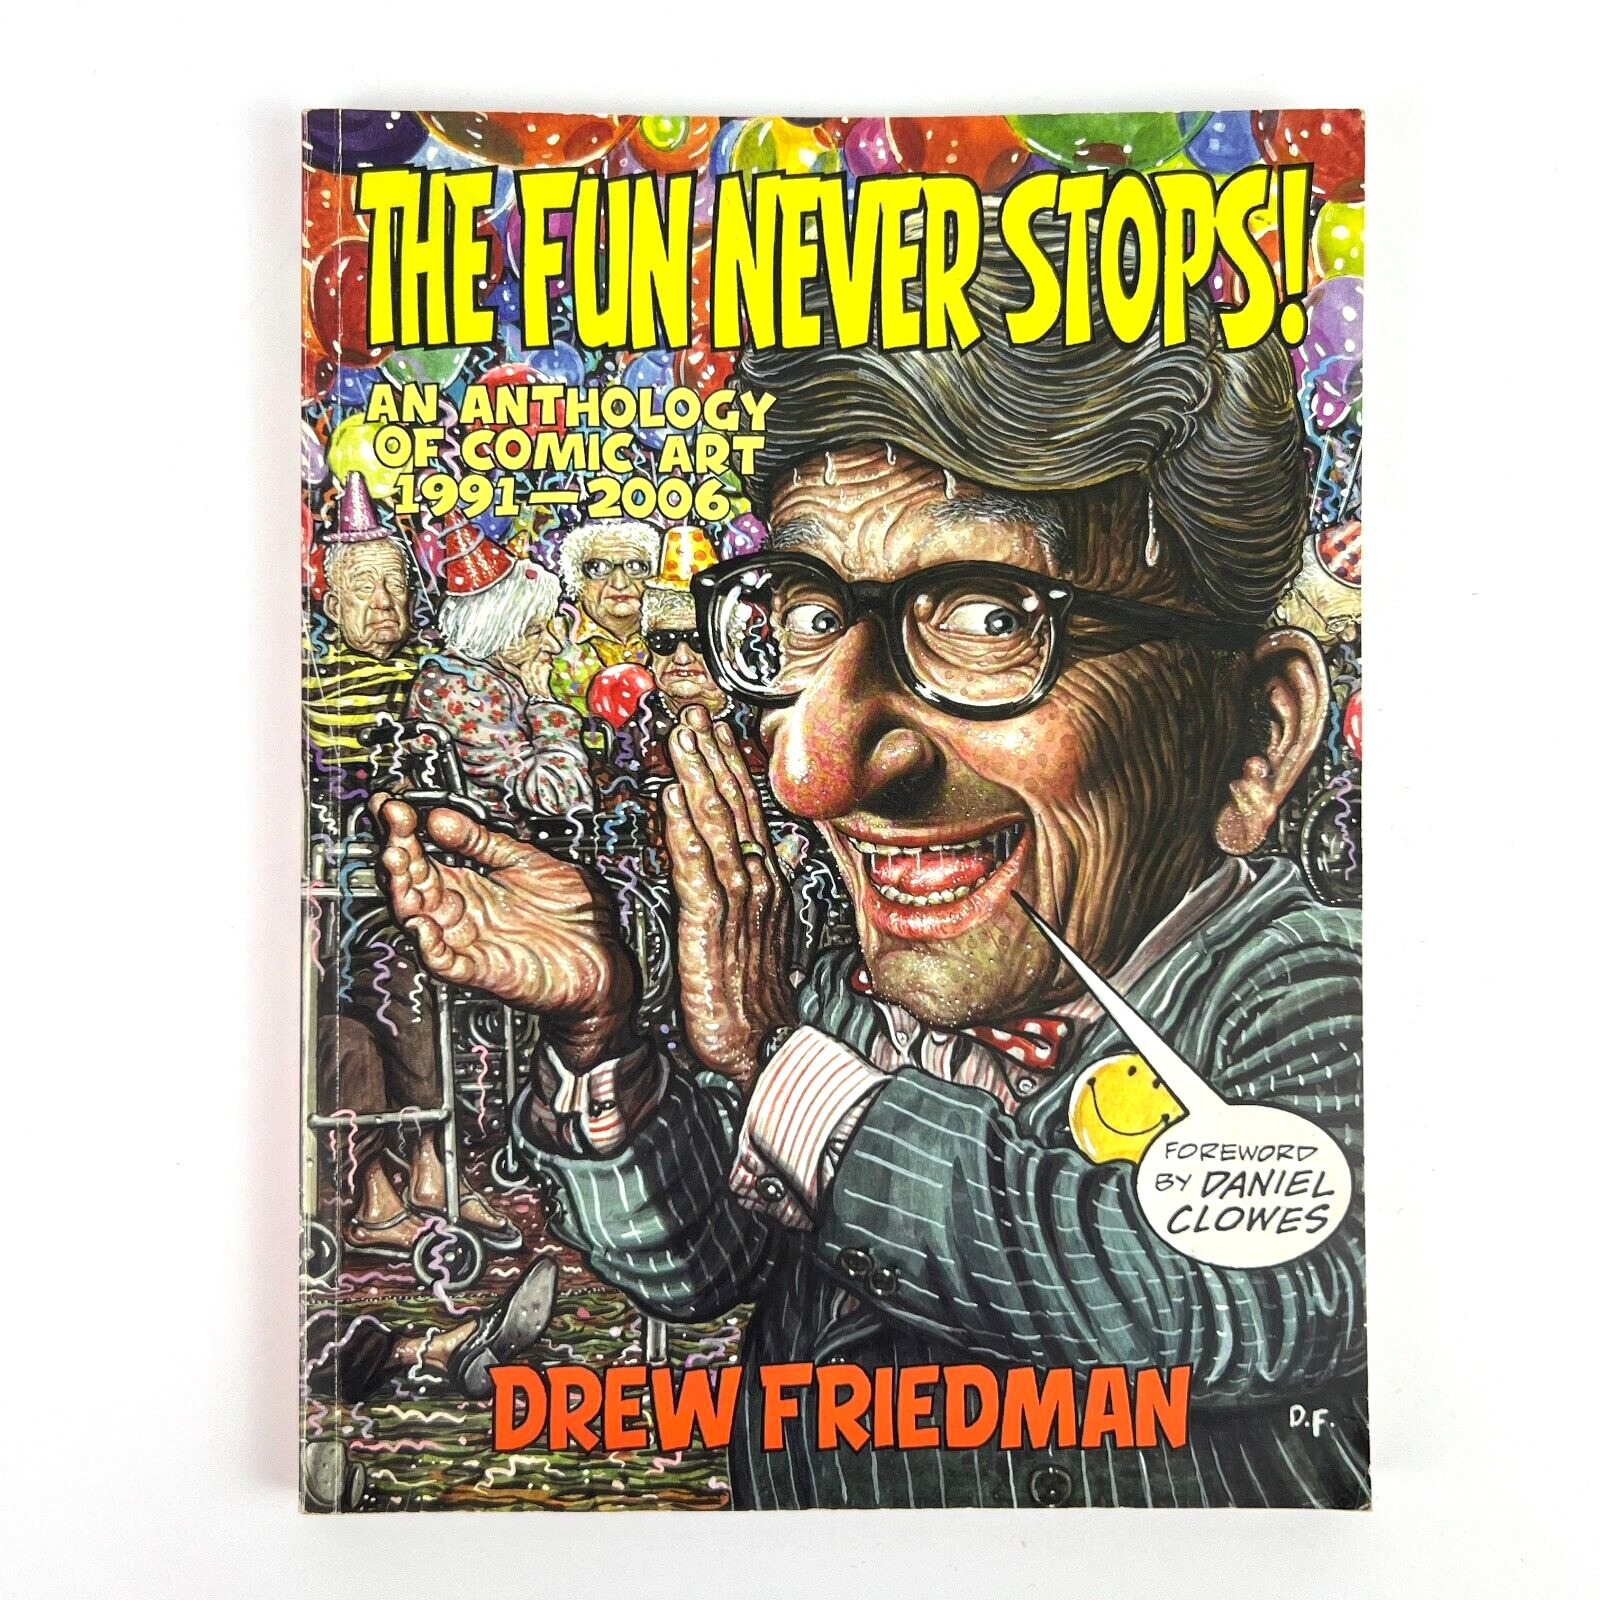 The Fun Never Stops An Anthology of Comic Art 1991 - 2006 by Drew Friedman